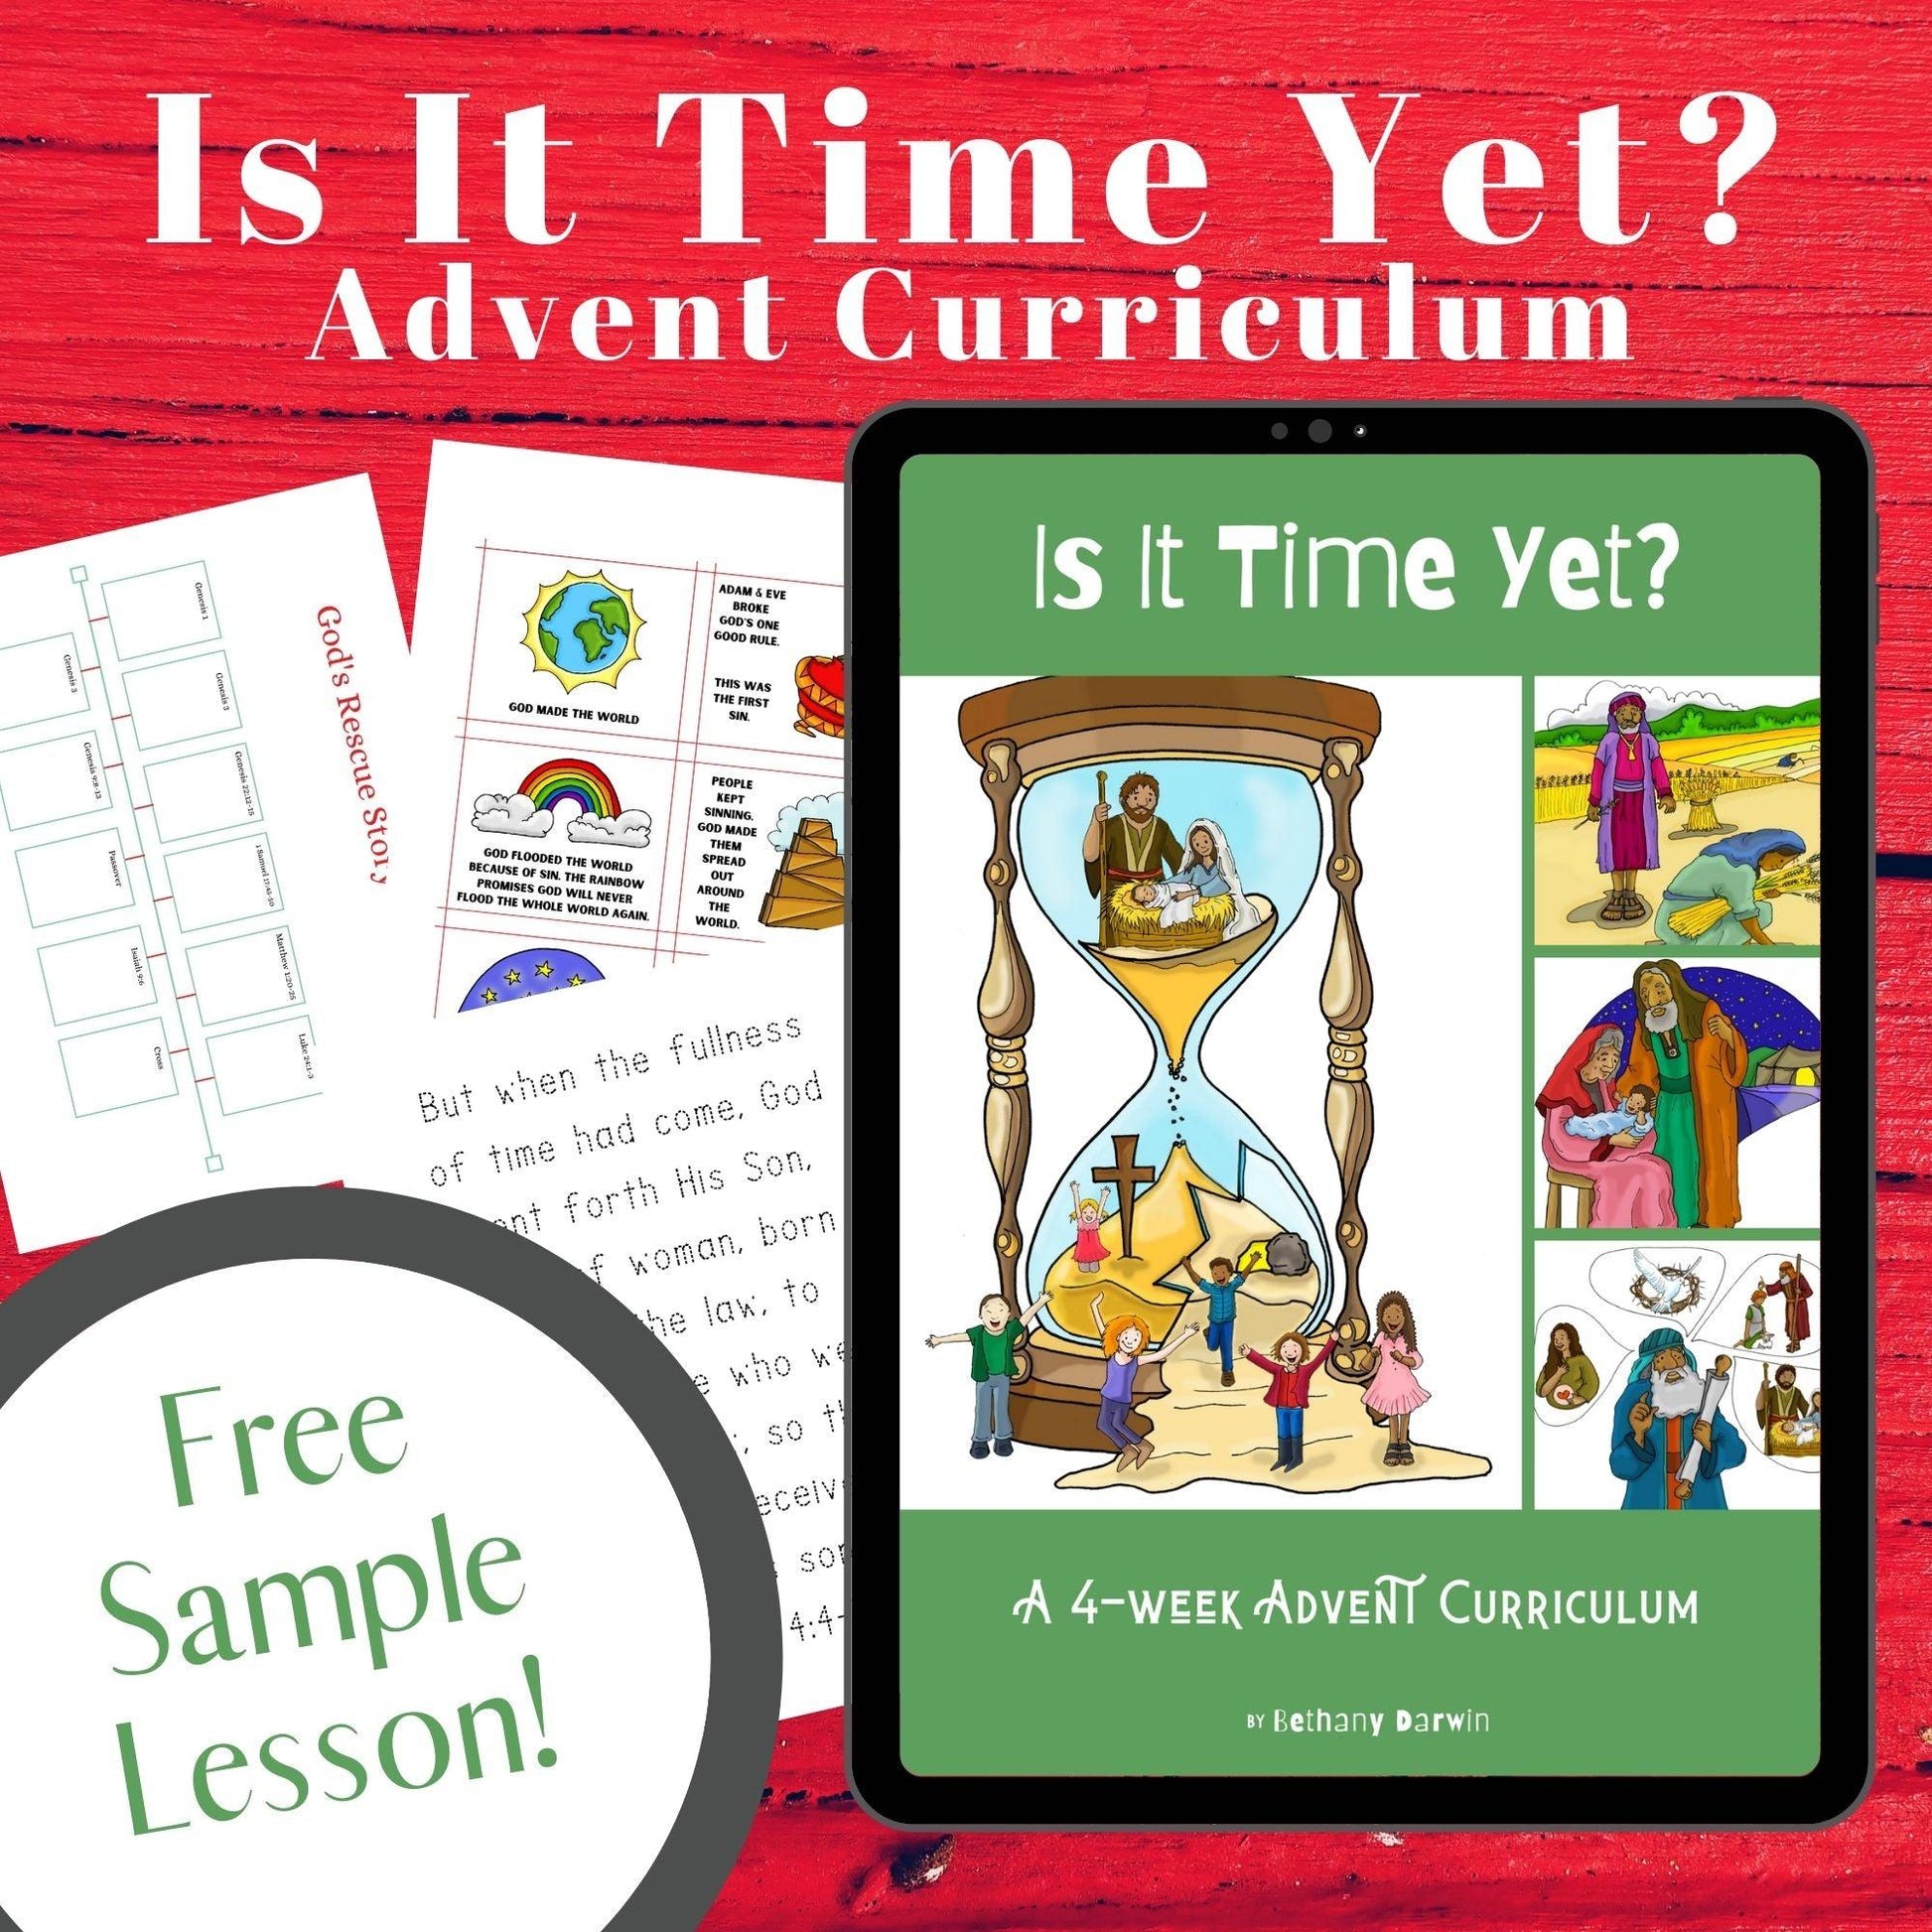 "Jesus Came at Just the Right Time" Lesson (FREE) Is It Time Yet? SAMPLE  (download only) - Sunday School Store 